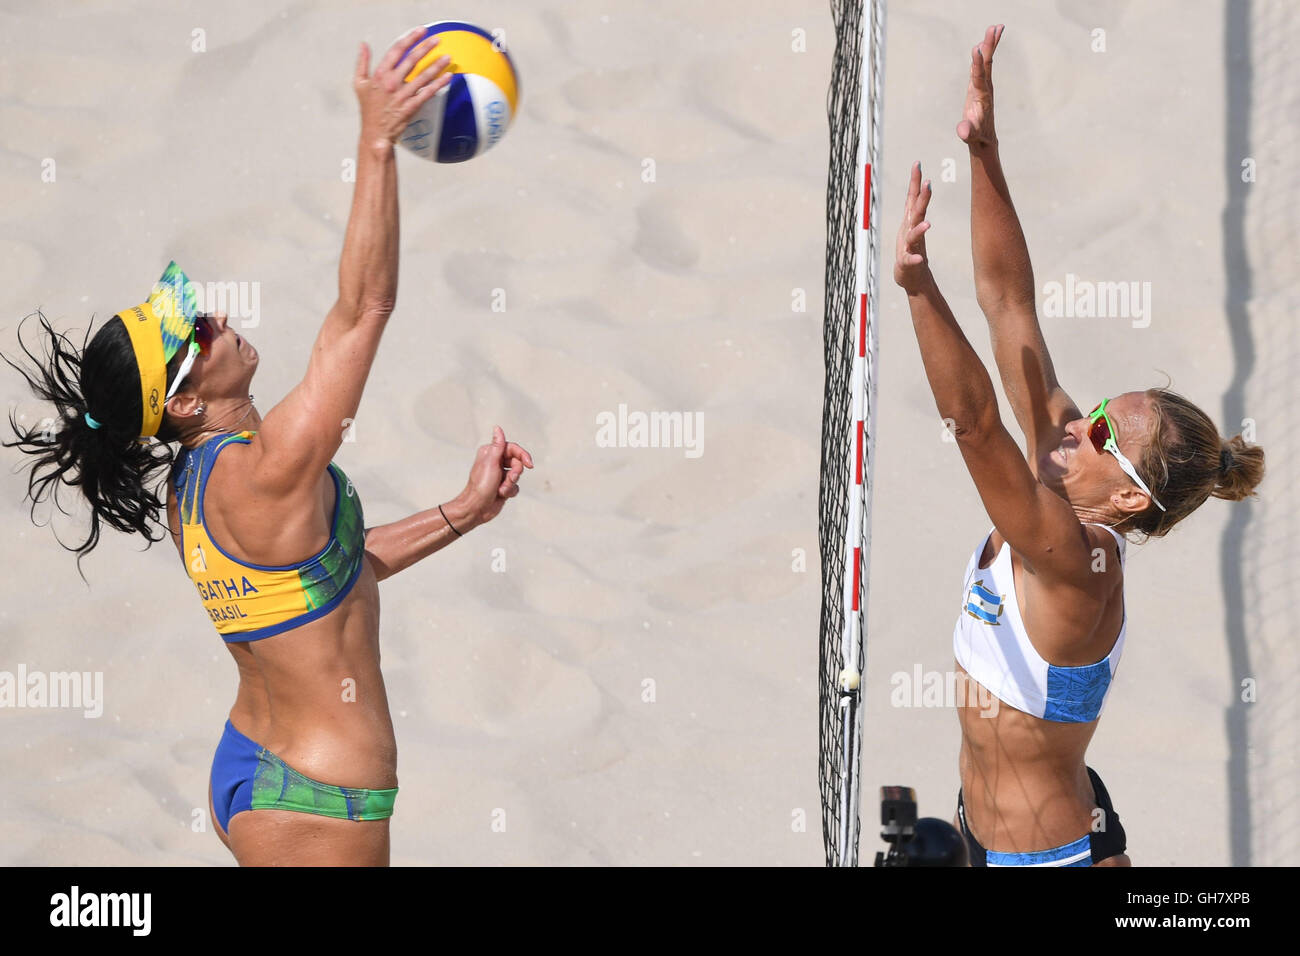 Rio de Janeiro, Brazil. 8th Aug, 2016. Agatha B. Rippel (L) of Brazil and Ana Gallay of Argentine in action during the Women's Preliminary match between Bednarczuk/Seixas de Freitas of Brazil and Gallay/Klug of Argentina of the Beach Volleyball events during the Rio 2016 Olympic Games at the Beach Volleyball Arena Copacabana in Rio de Janeiro, Brazil, 8 August 2016. Photo: Sebastian Kahnert/dpa/Alamy Live News Stock Photo